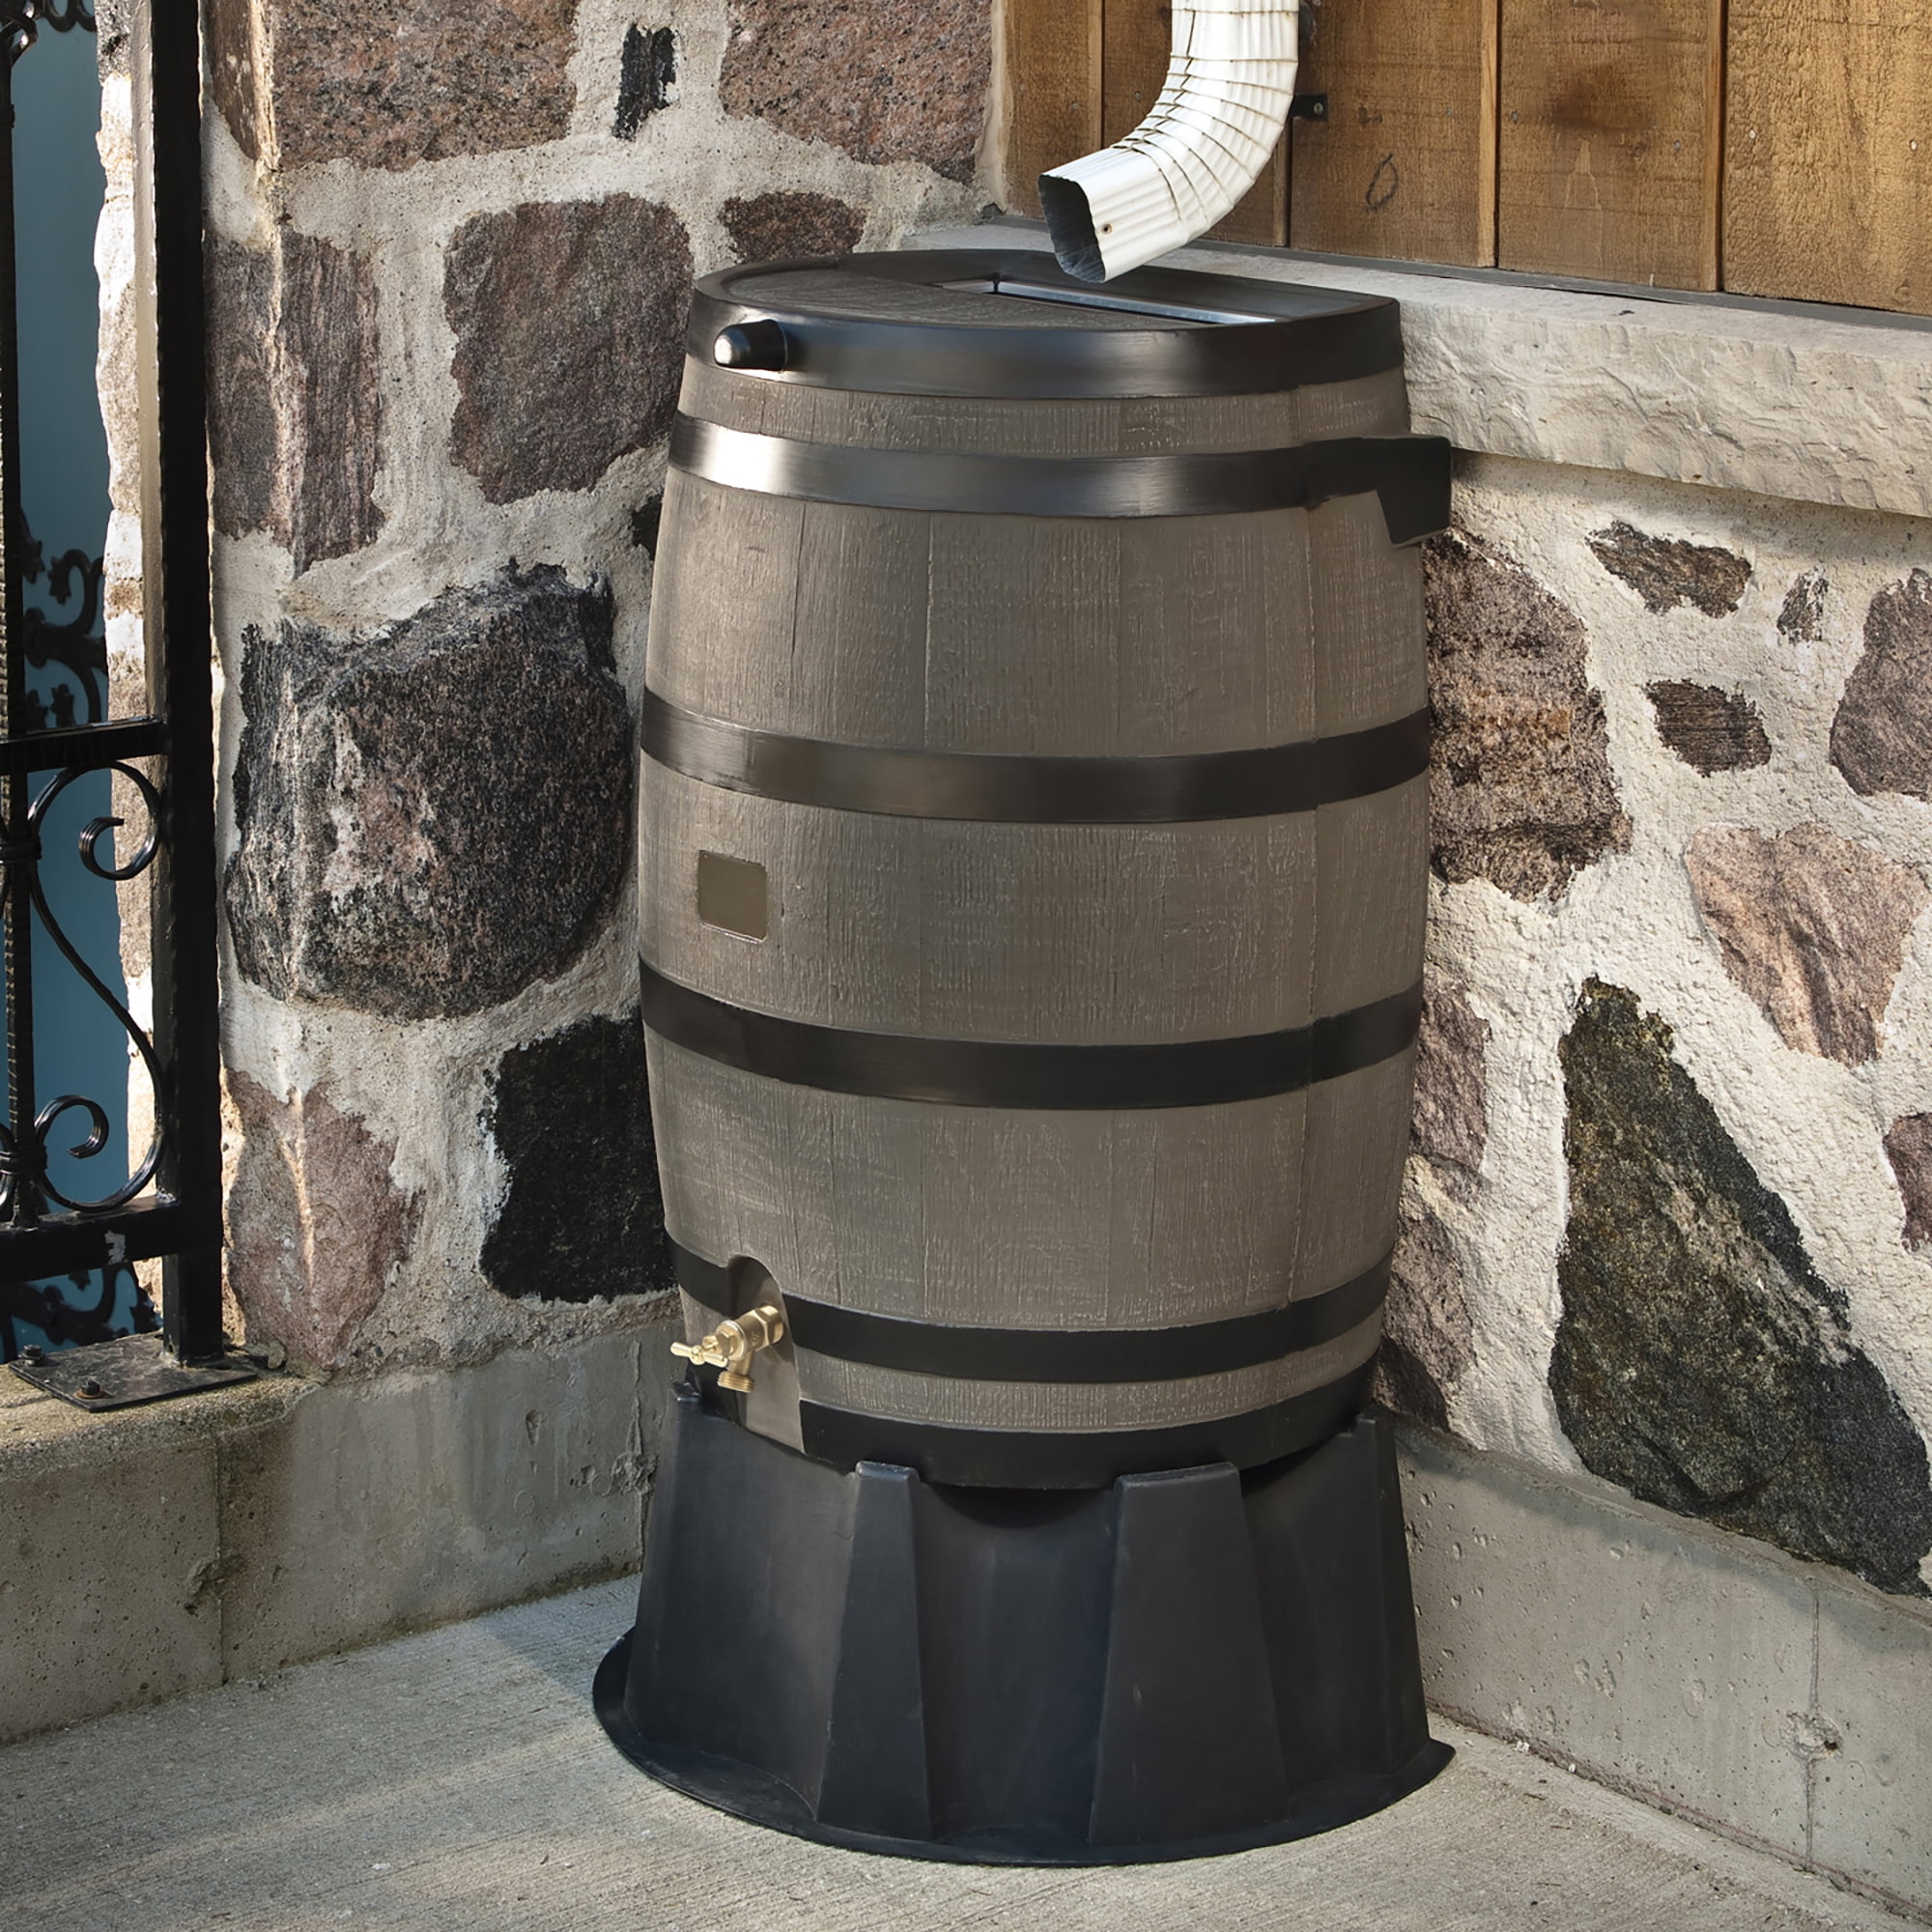 RTS Home Accents 50-Gallon Rain Water Collection Barrel with Brass Spigot Tan 